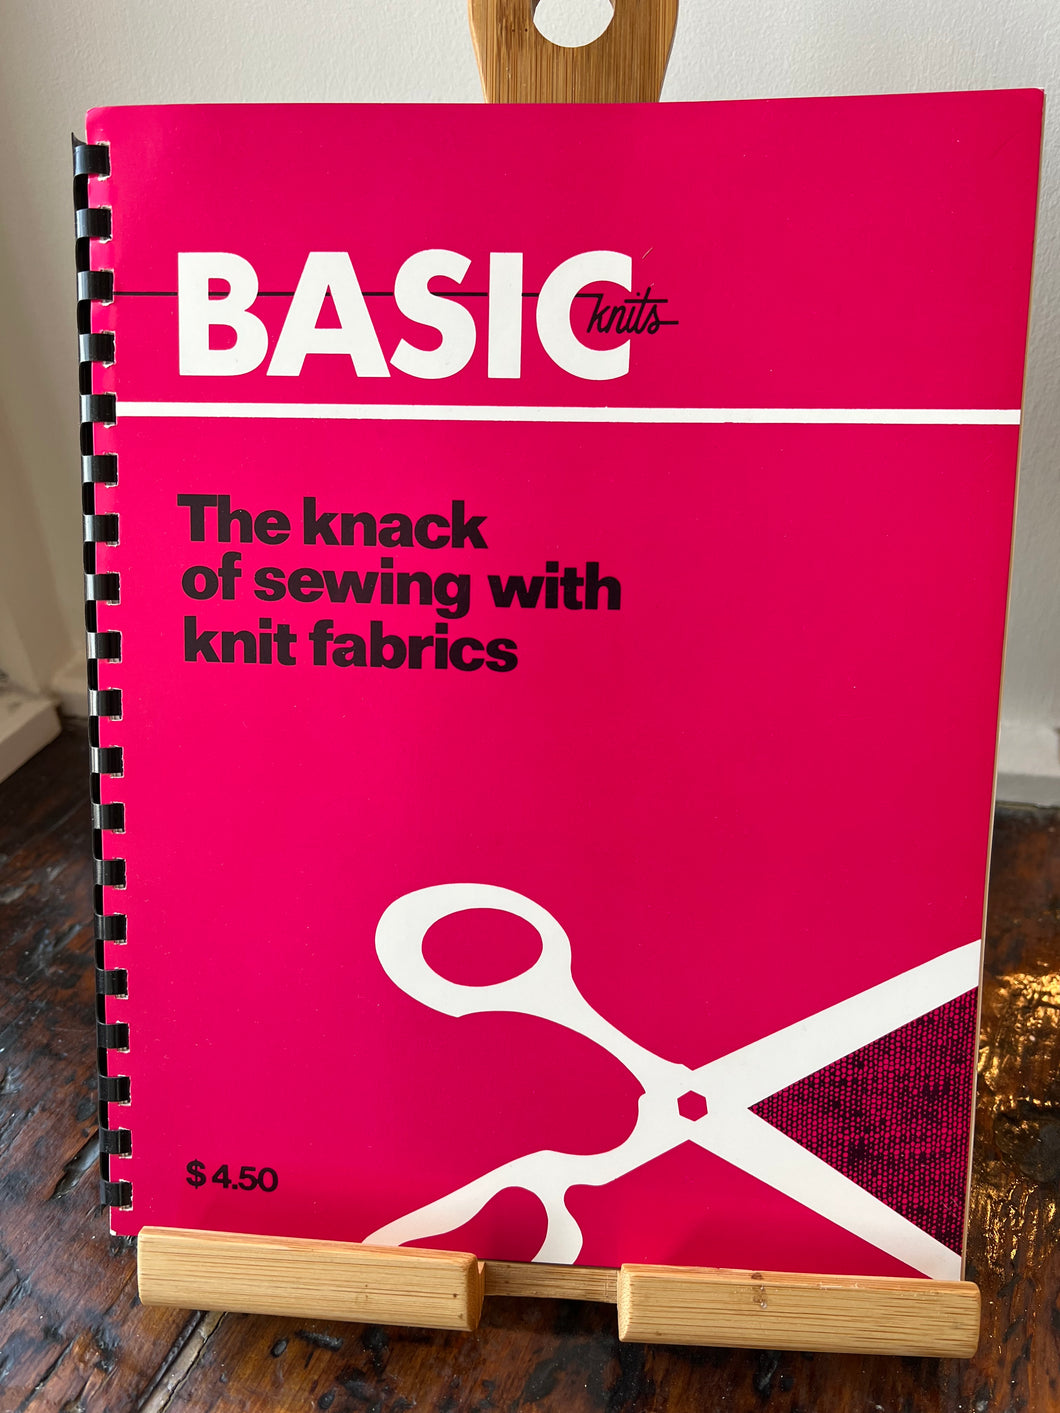 Basic Knits - The knack of sewing with knits